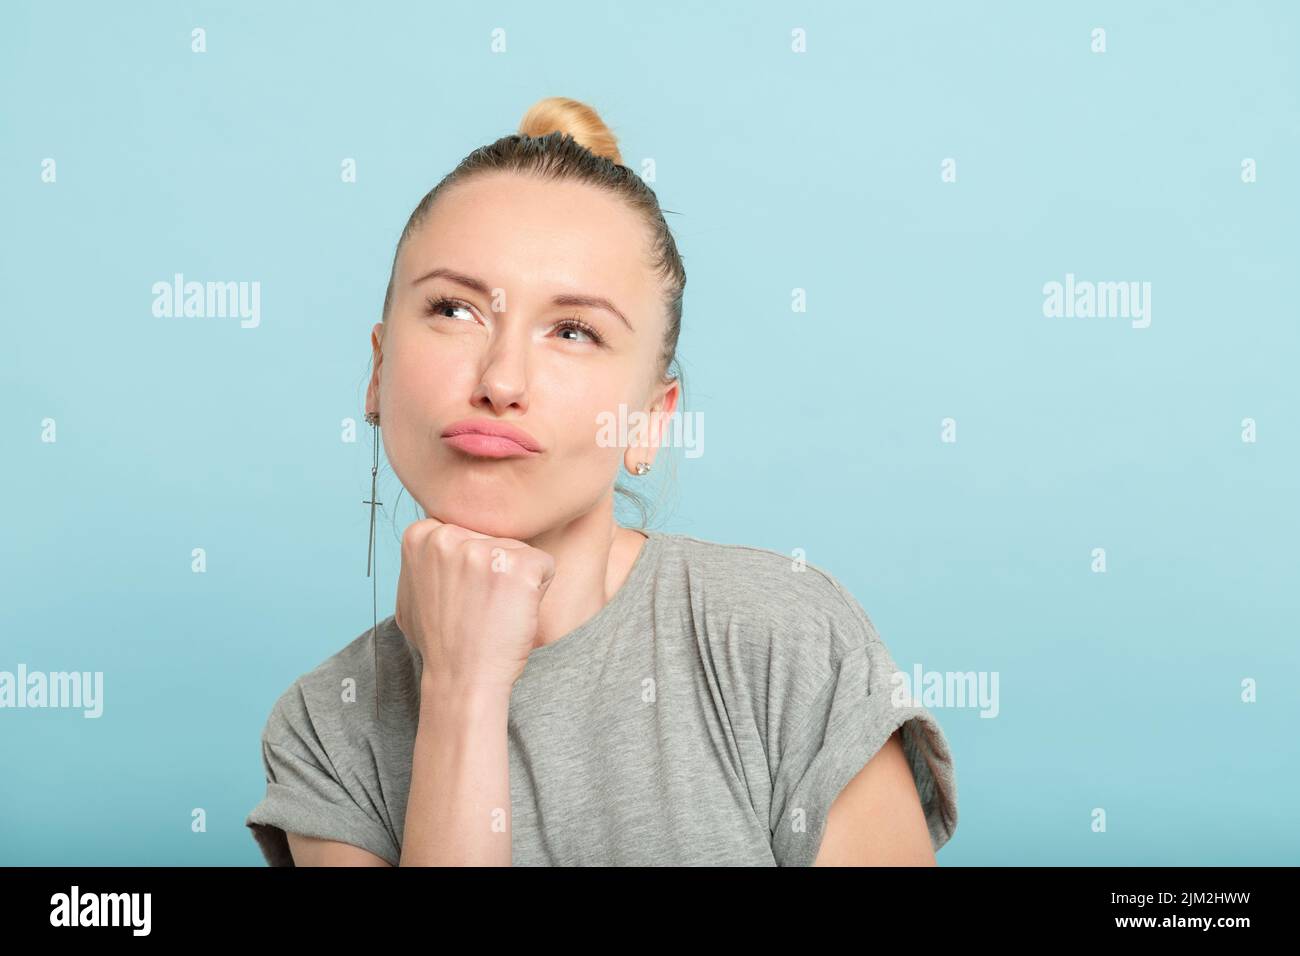 thoughtful woman pout duckface facial expression Stock Photo